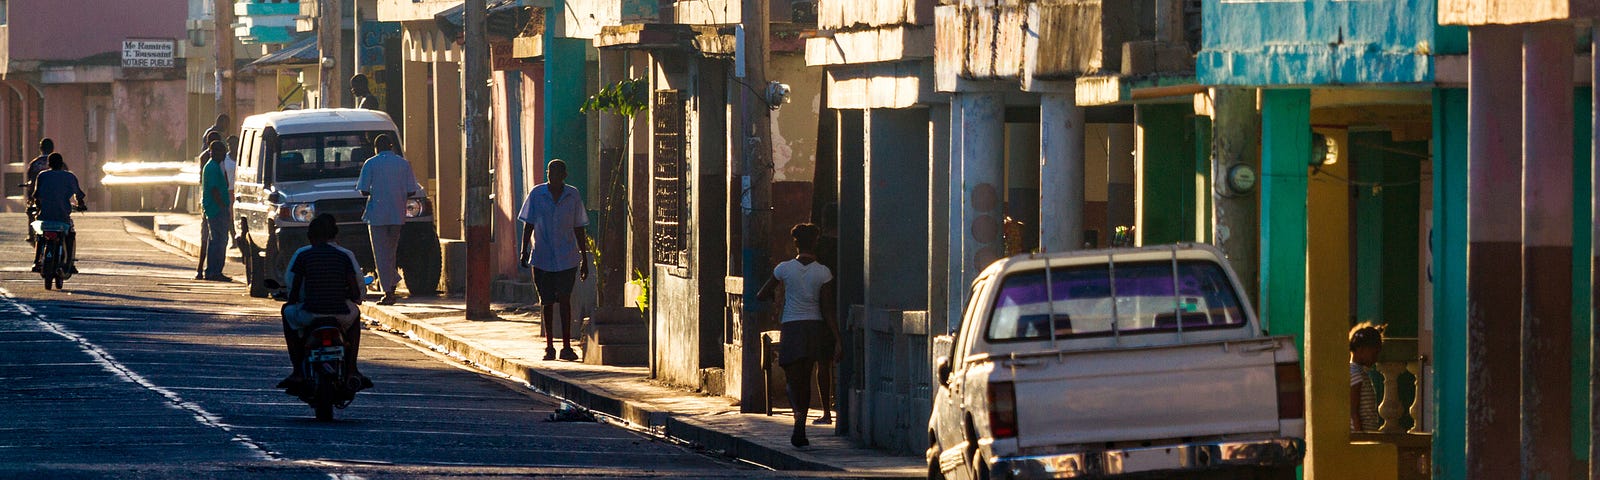 A photo of a street in St Louis du Nord in Haiti.